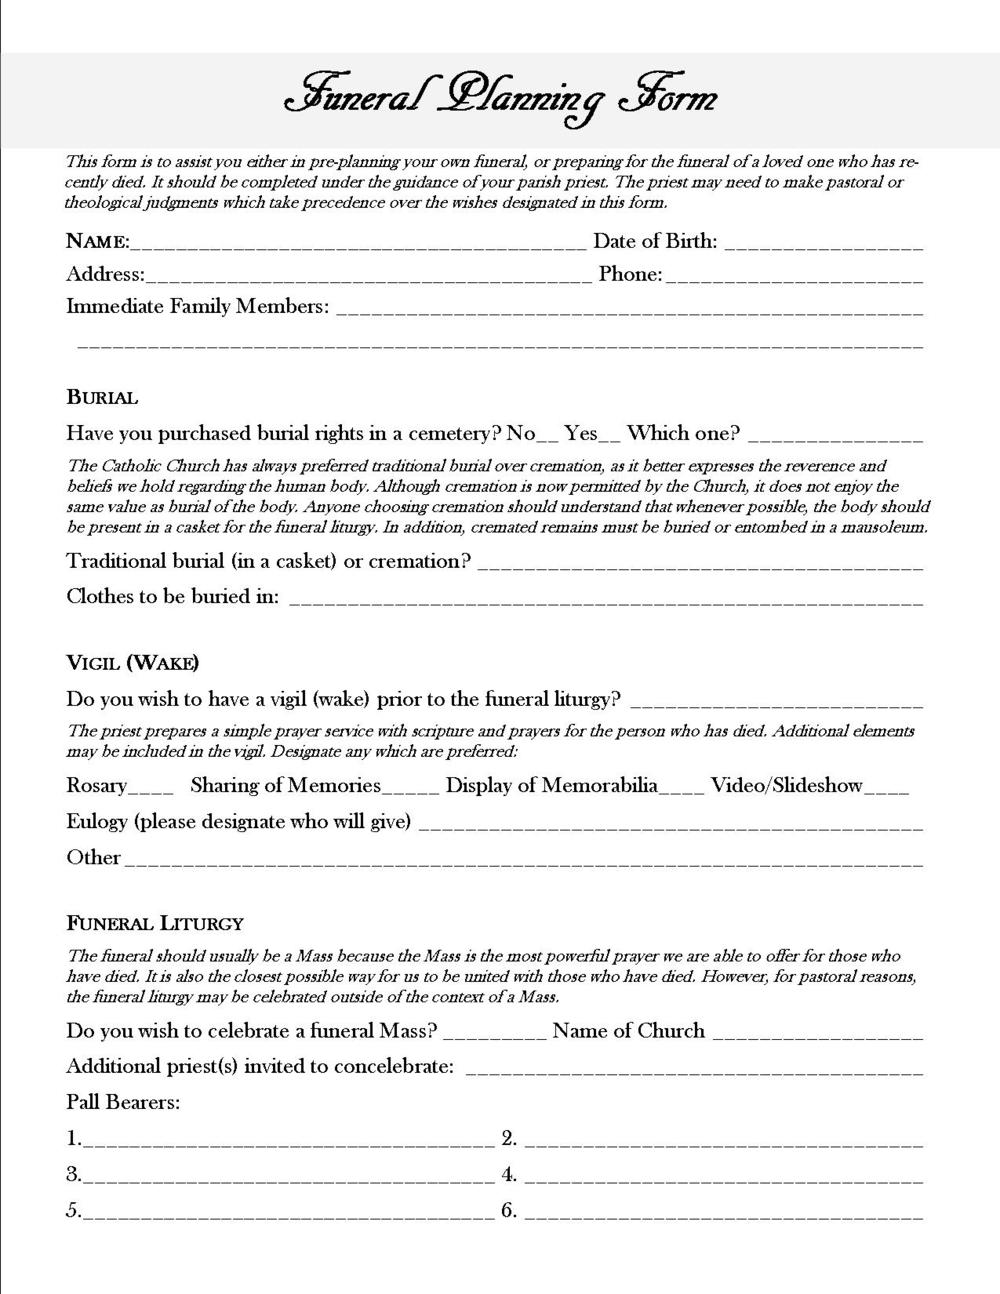 Funeral Planning Form charlotte clergy coalition